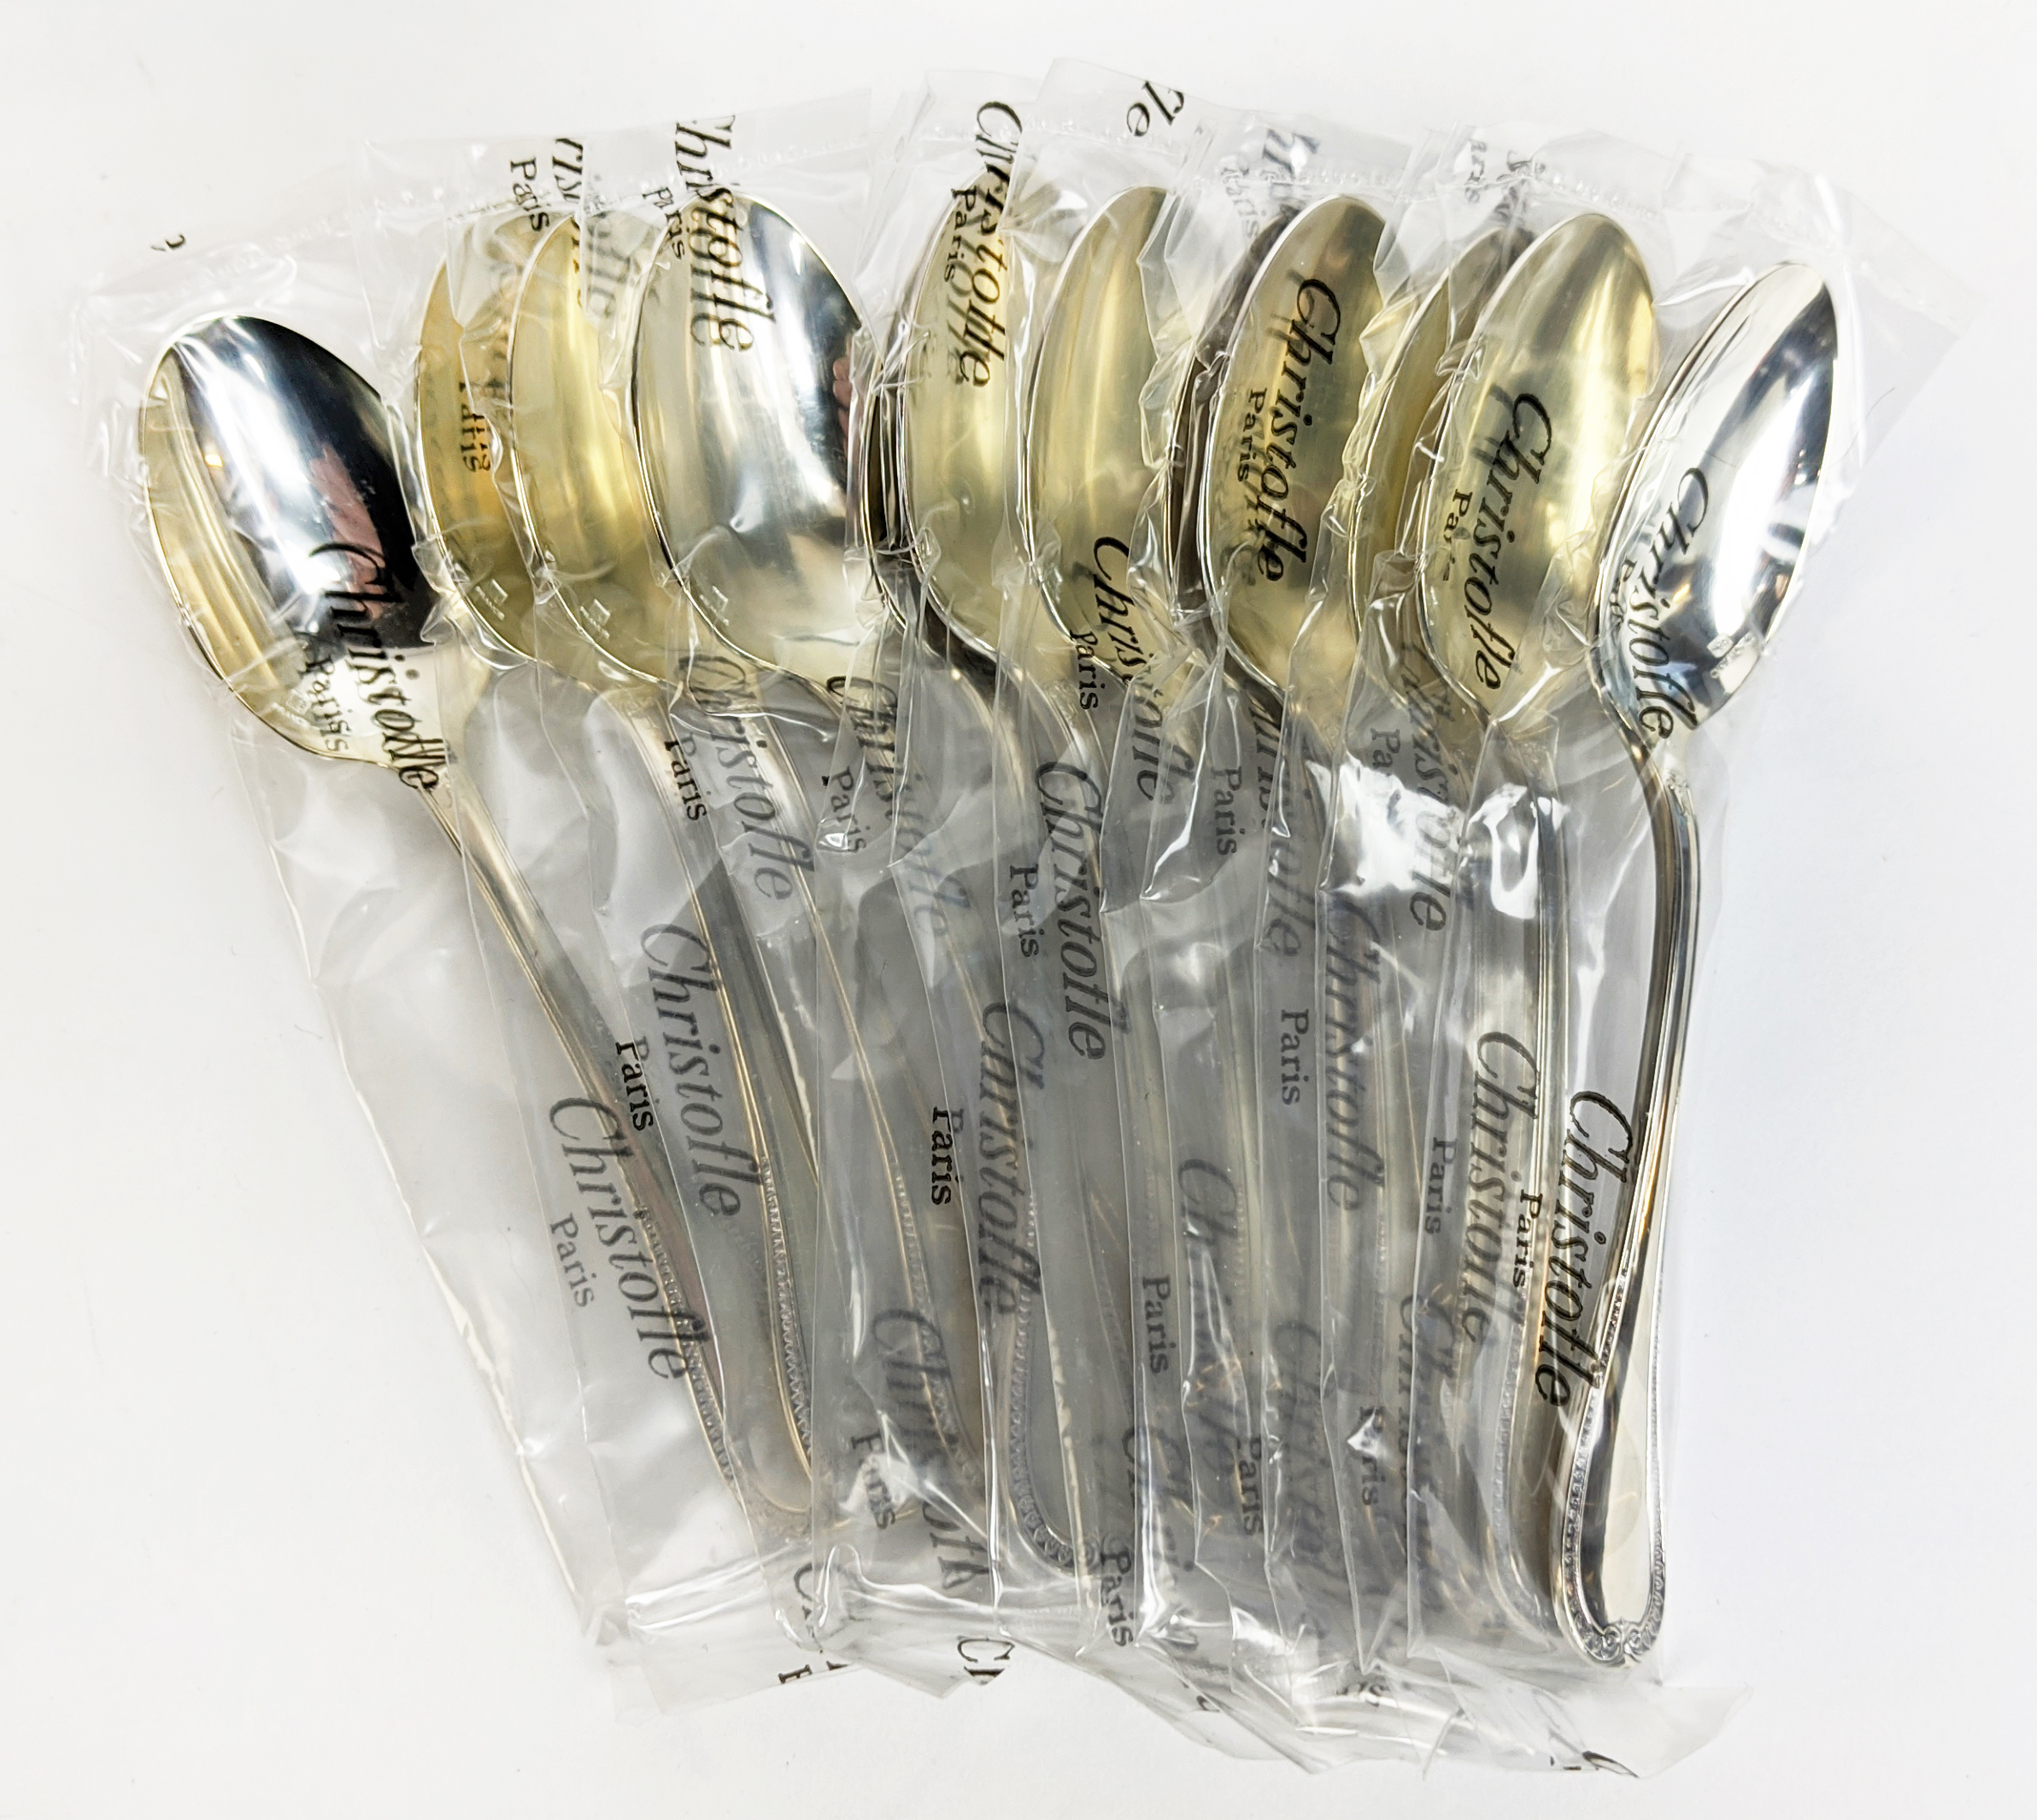 CHRISTOFLE COLLECTION OF CUTLERY, comprising 12 dinner knives, 12 dinner forks, 12 table spoons, - Image 5 of 19